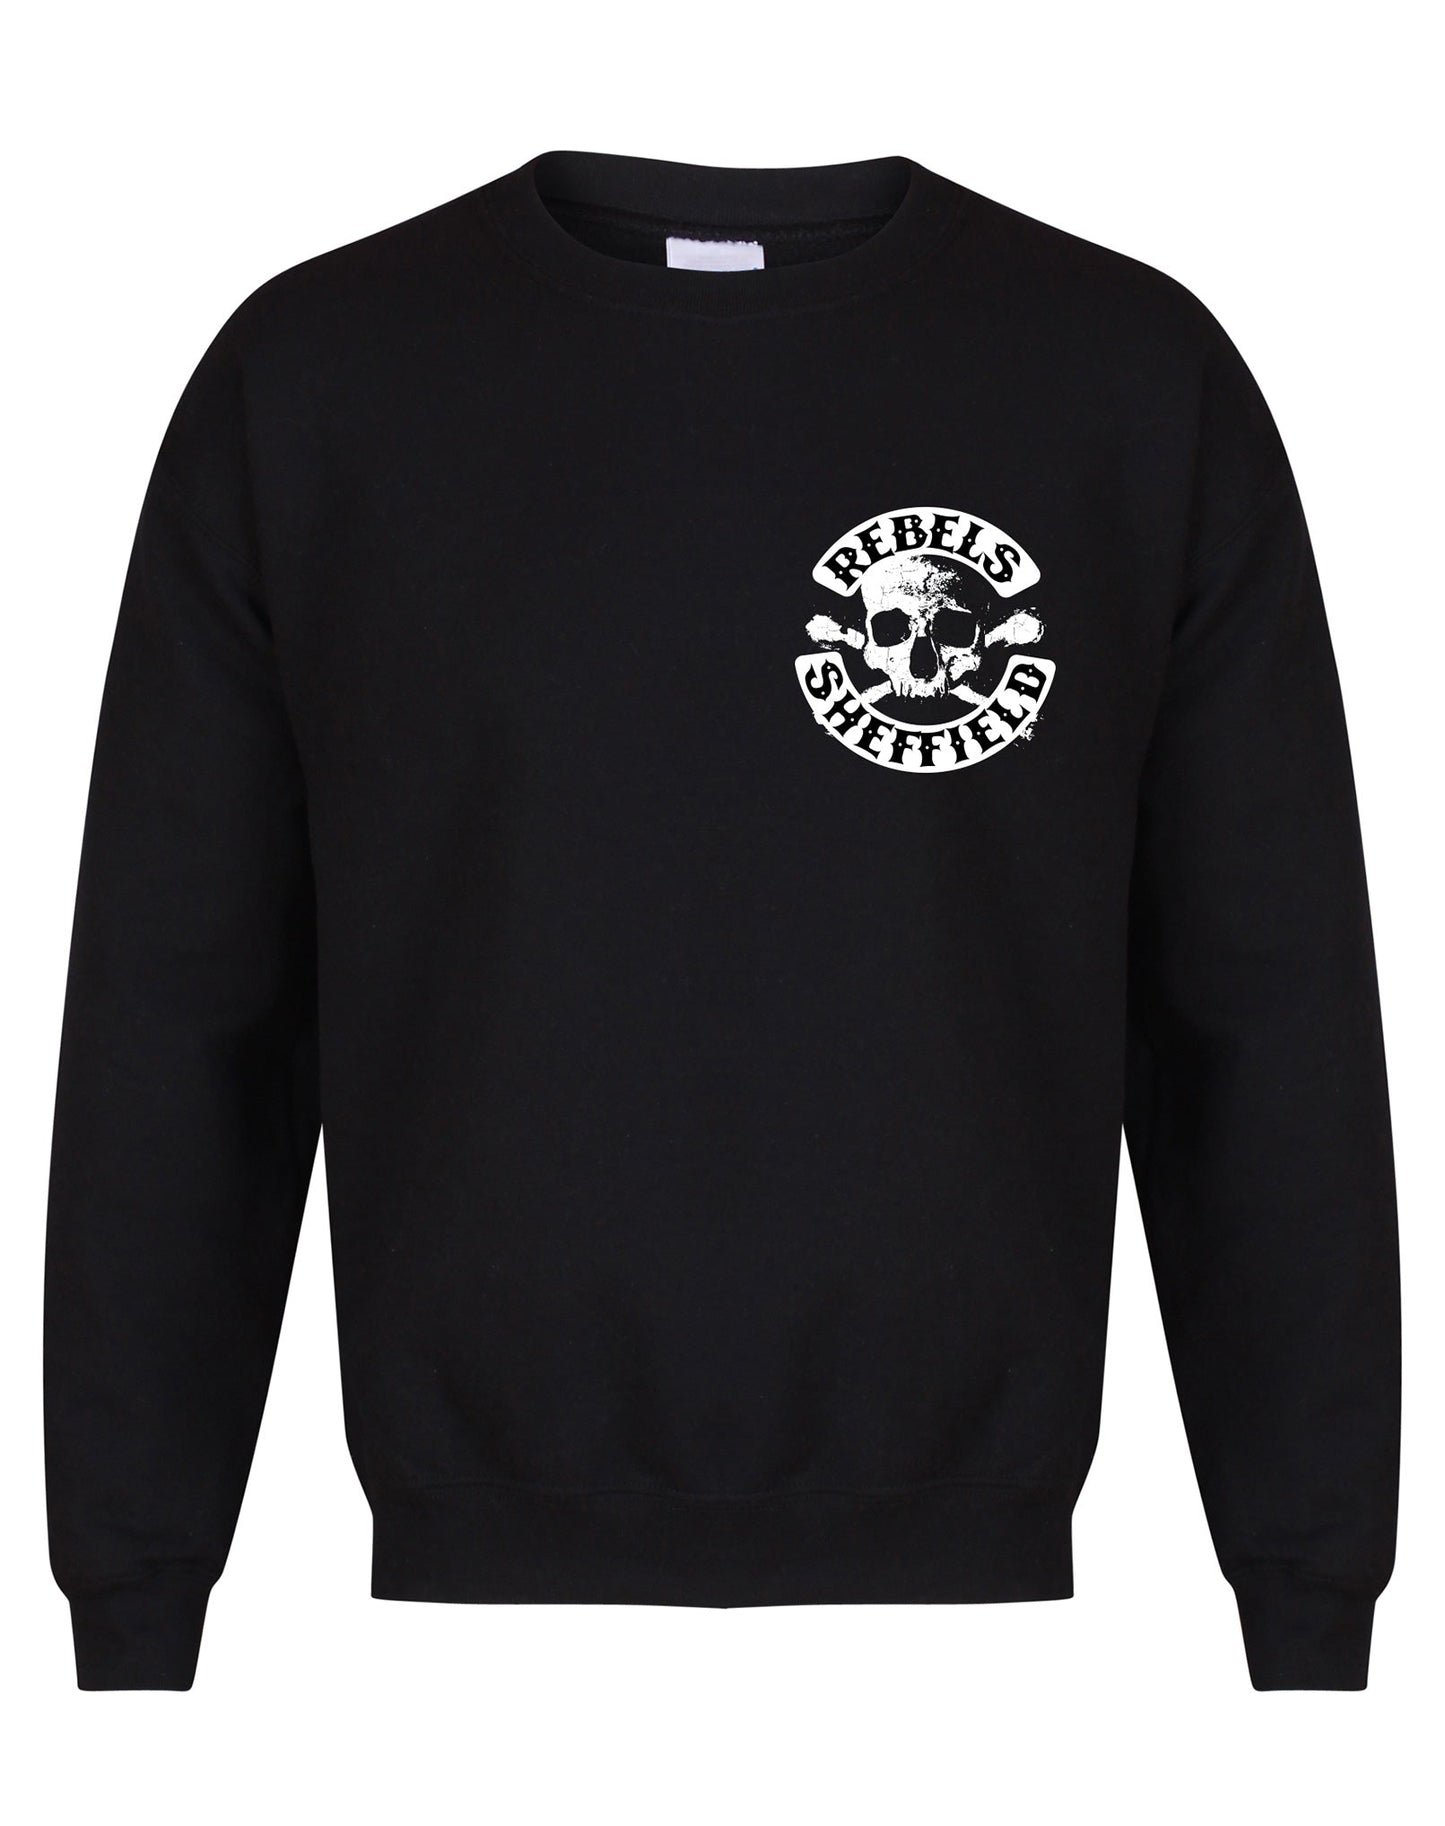 Rebels small skull unisex fit sweatshirt - various colours - Dirty Stop Outs